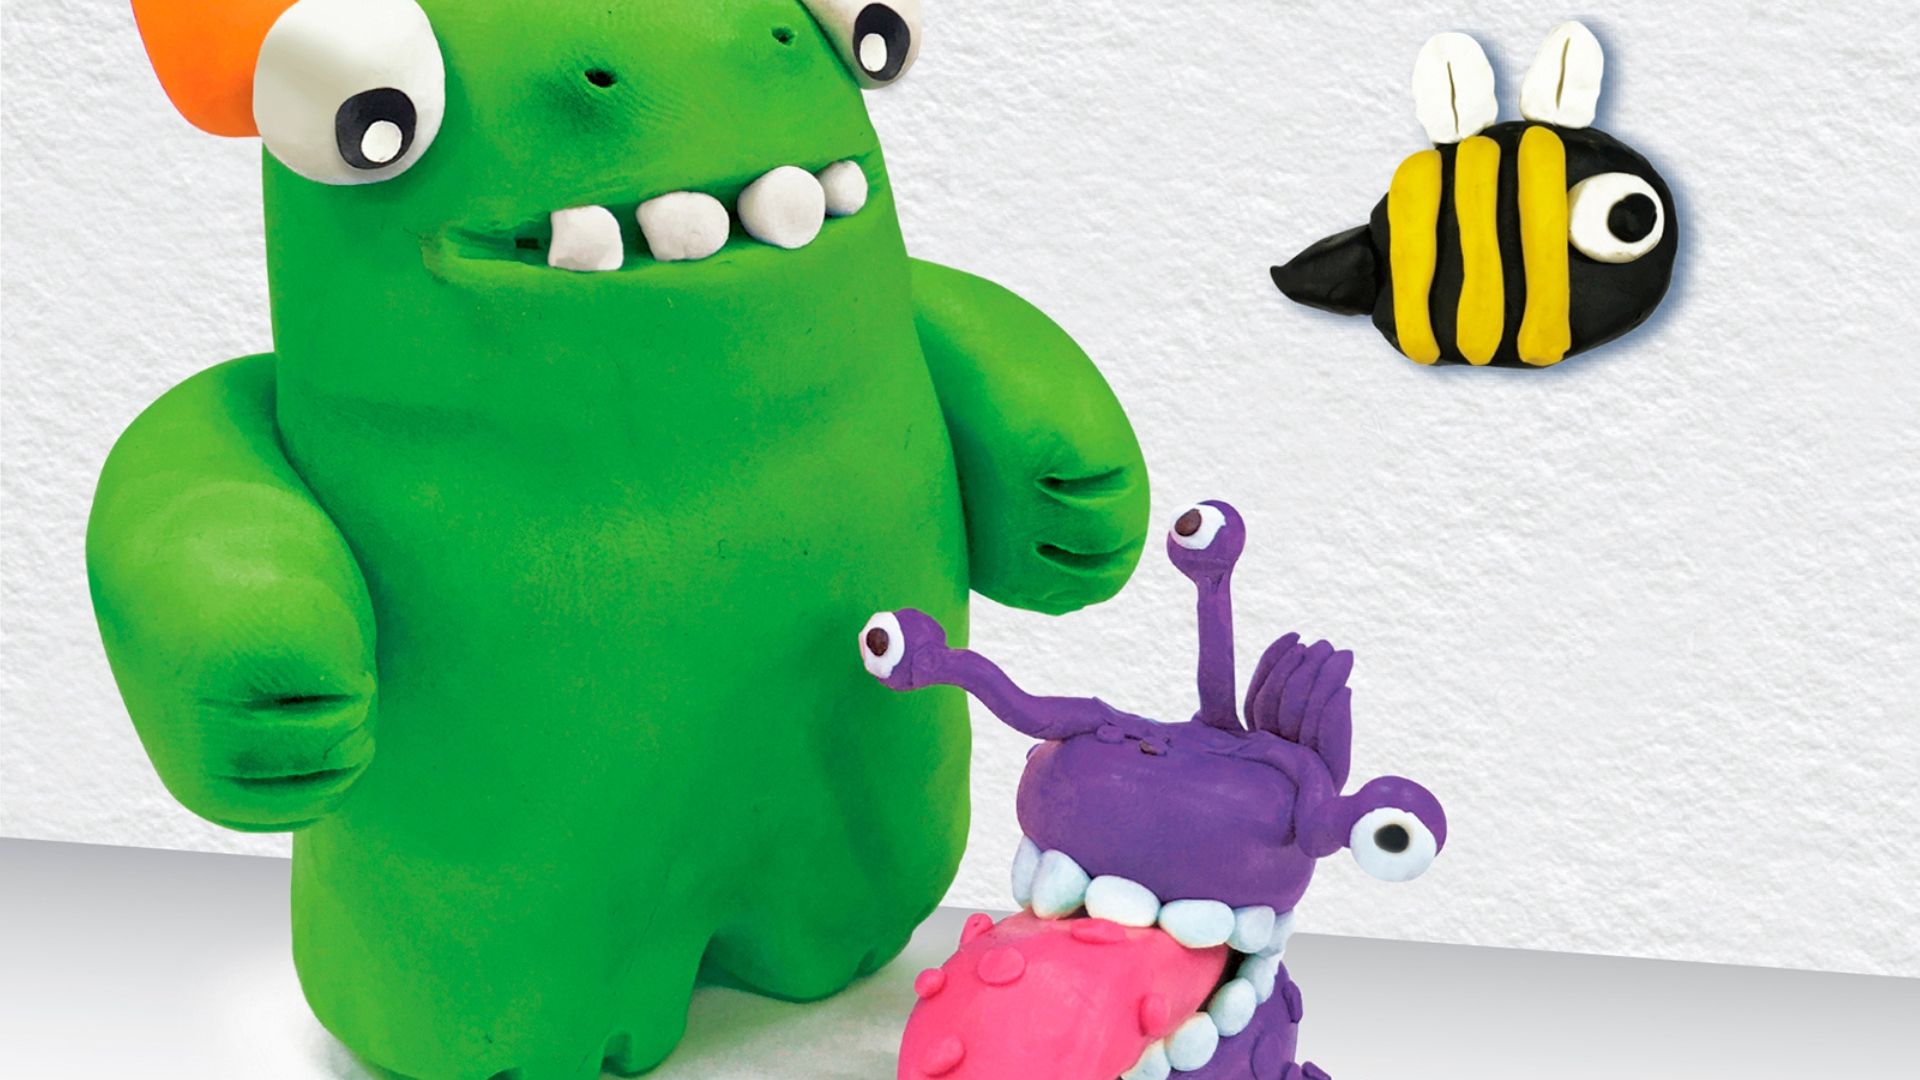 Coloured clay creatures and monsters